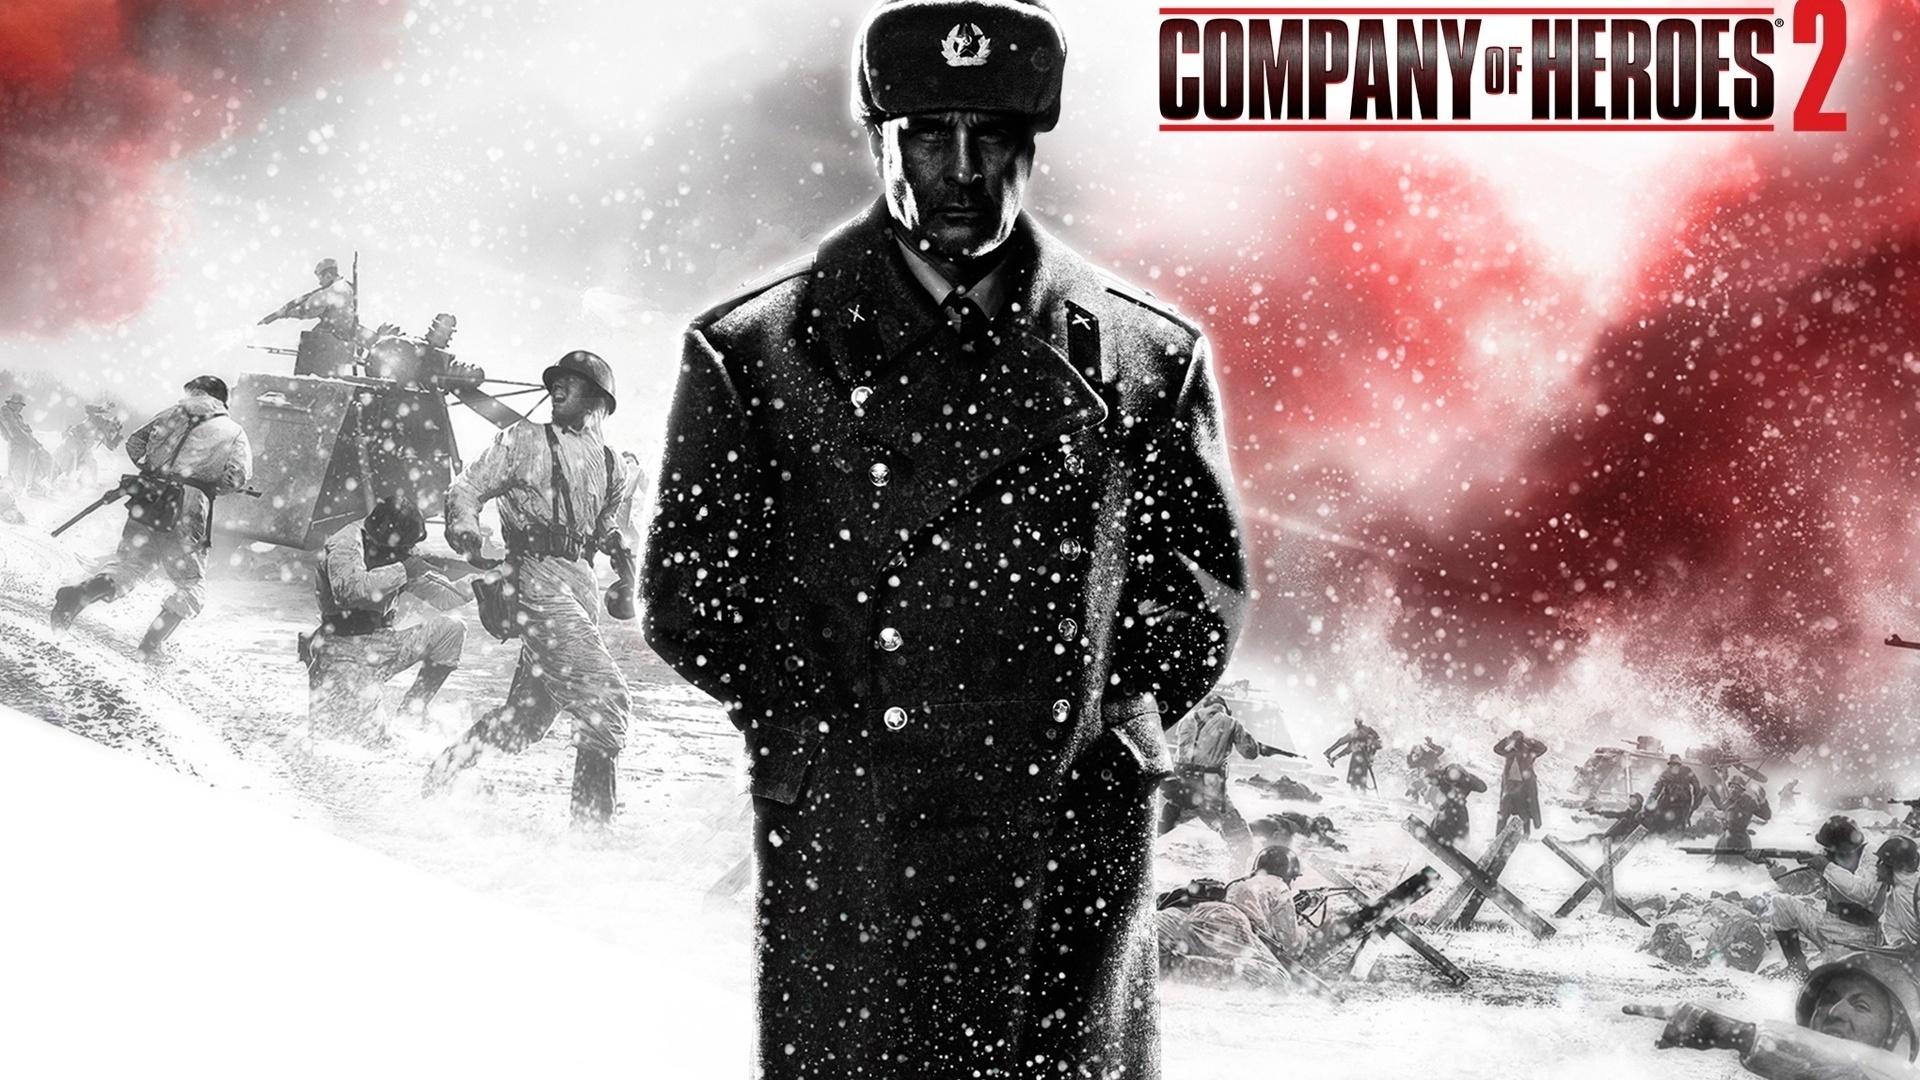 Company of Heroes 2 Game for 1920 x 1080 HDTV 1080p resolution